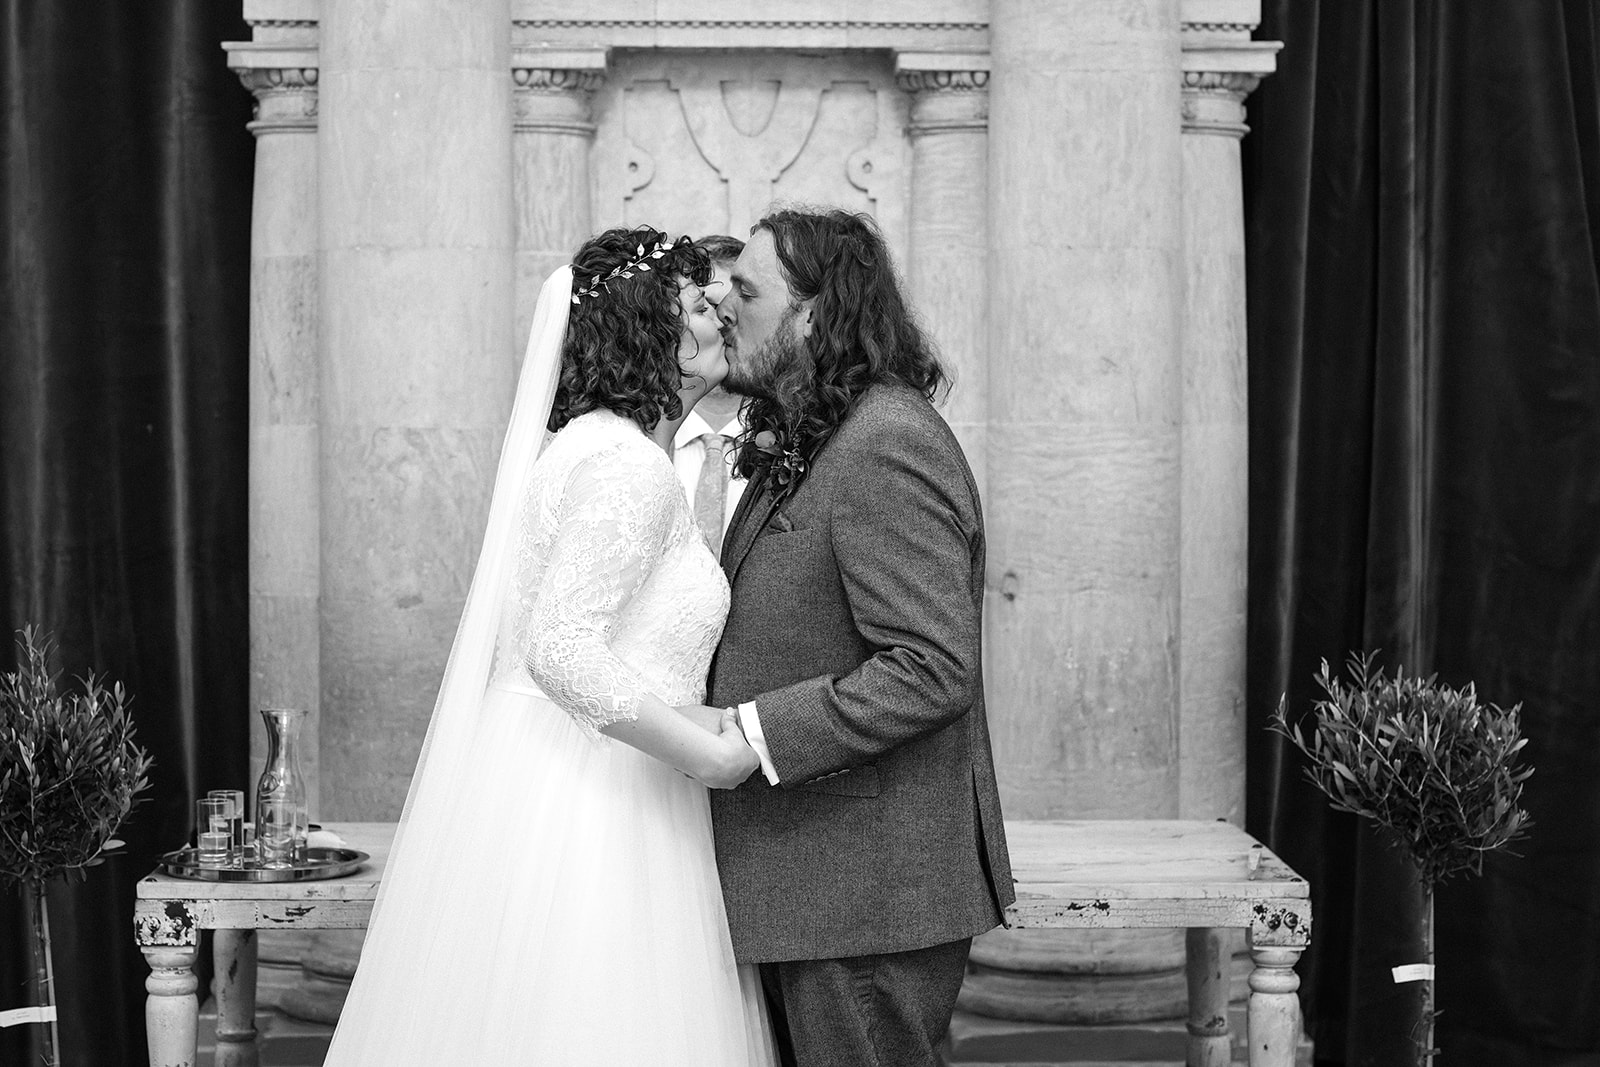 The bride and groom kiss after their wedding ceremony at Wollaton Hall